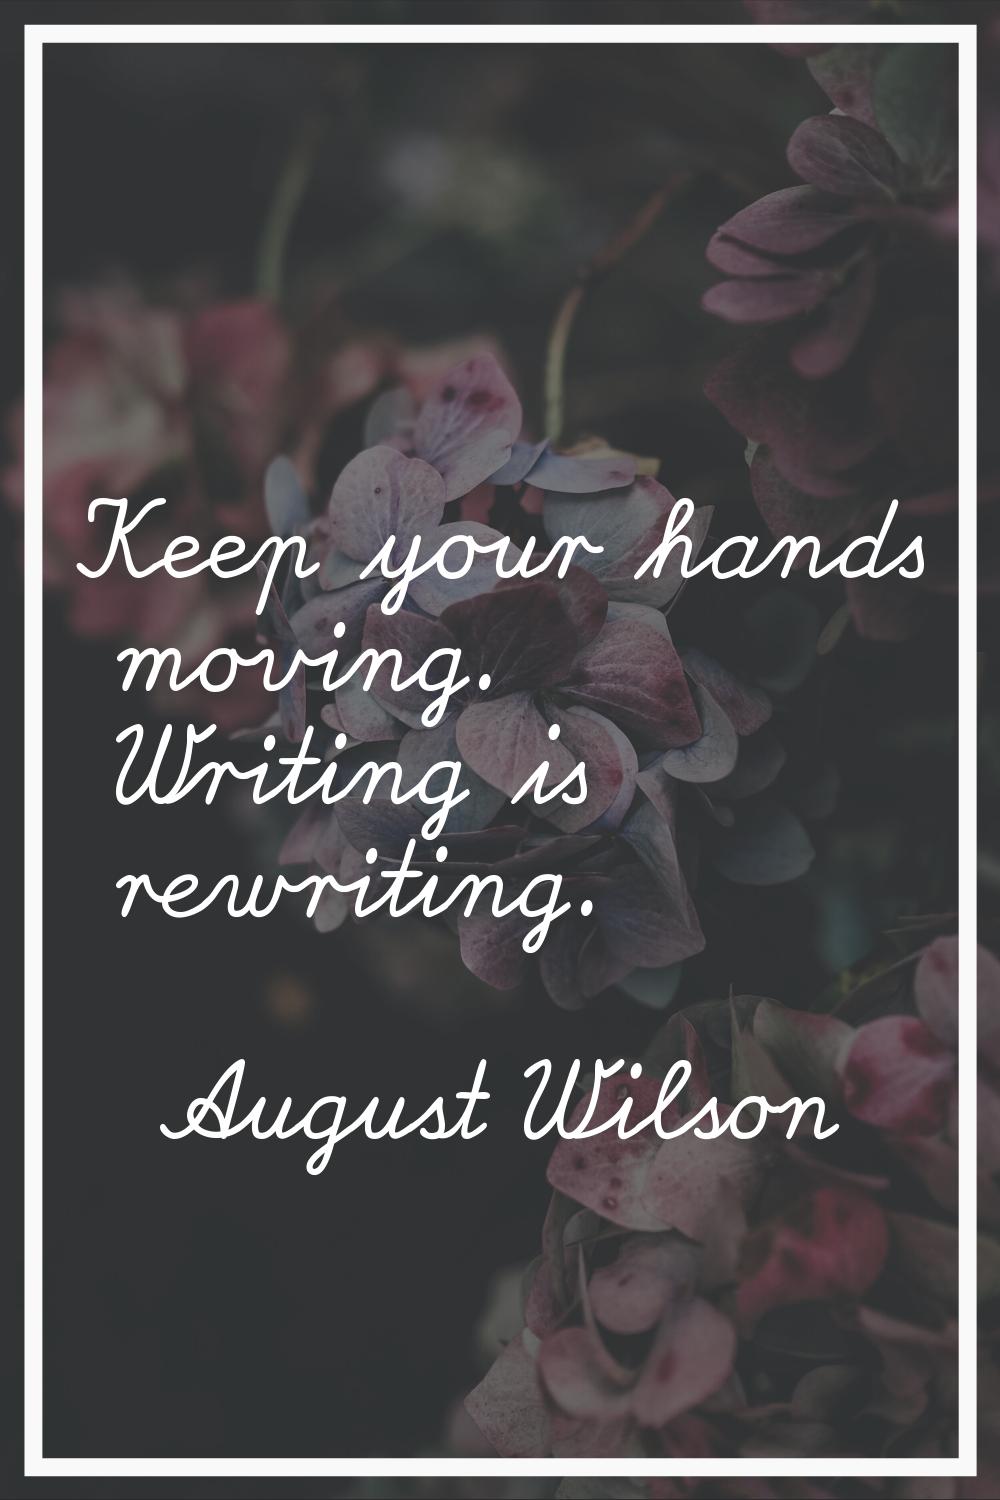 Keep your hands moving. Writing is rewriting.